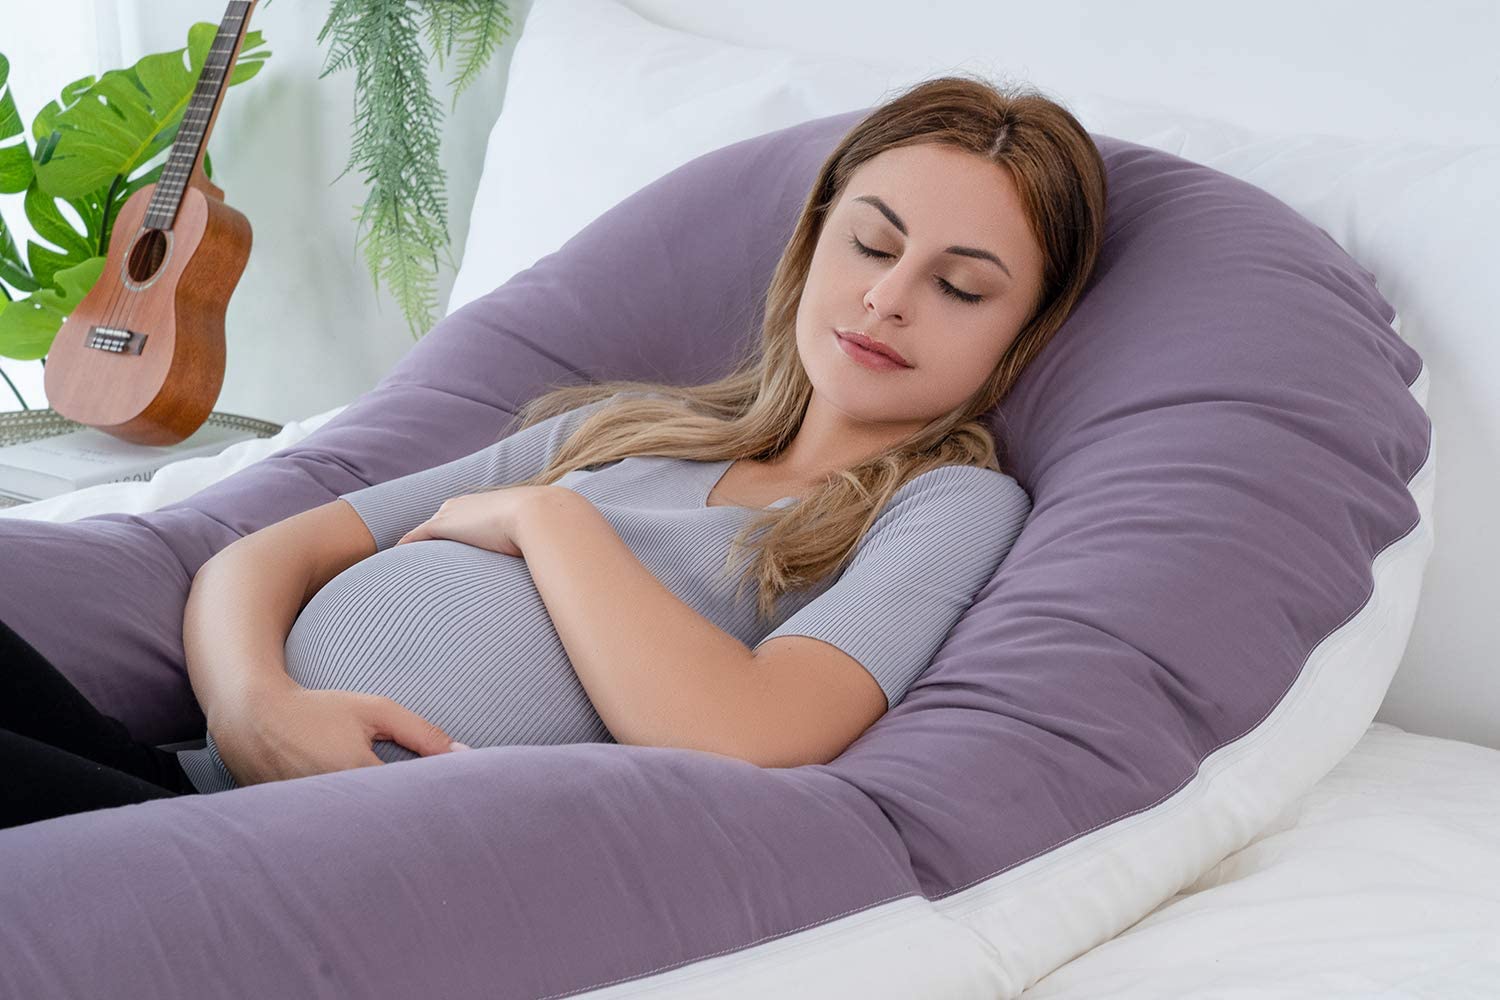 QUEEN ROSE U Shaped Pregnancy Body Pillow -Pregnancy and Maternity Pillow for Pregnant Women,with Luxury Satin Cover